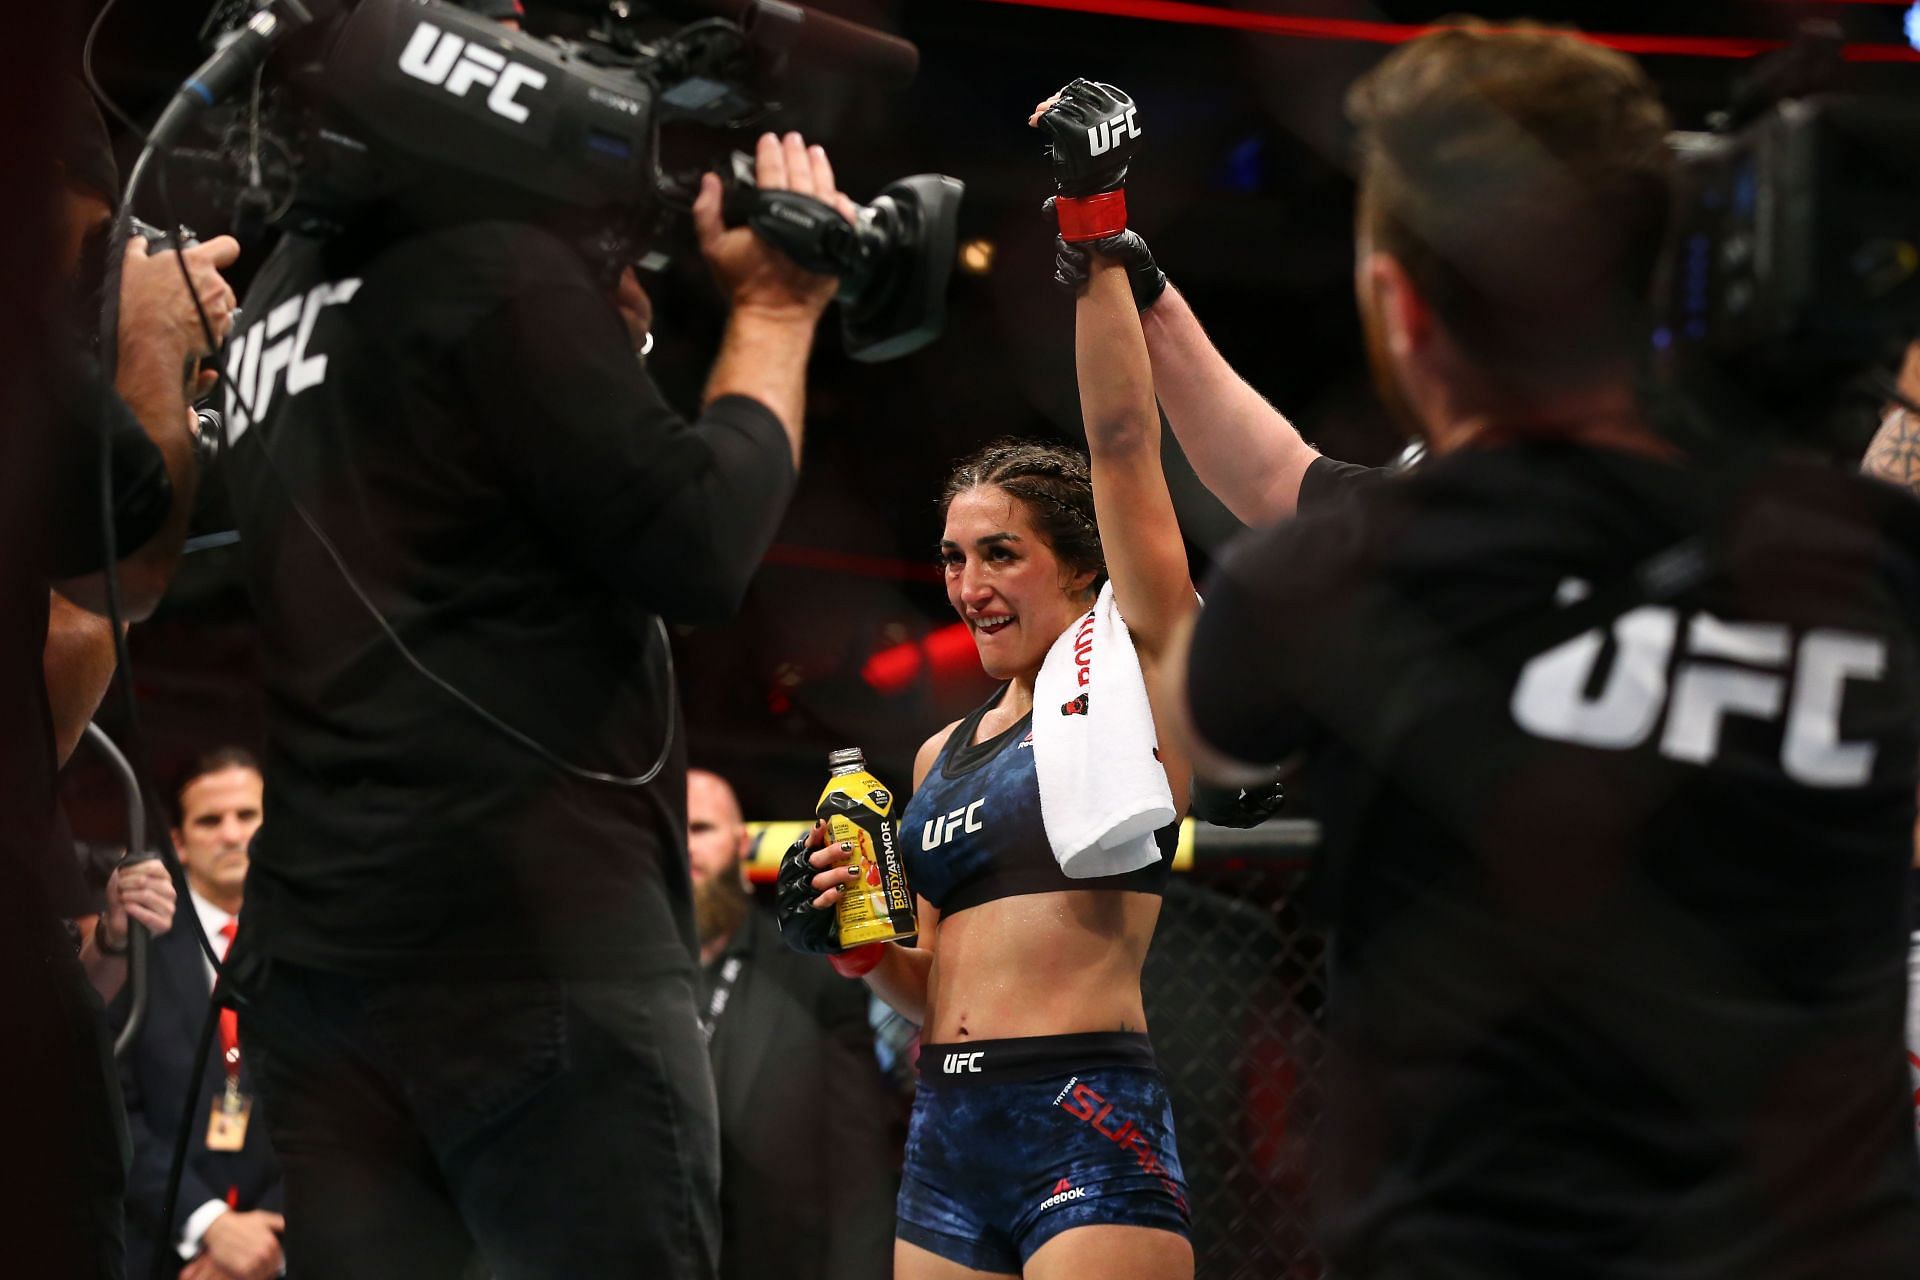 Before her neck injury, Tatiana Suarez was a remarkably dominant grappler